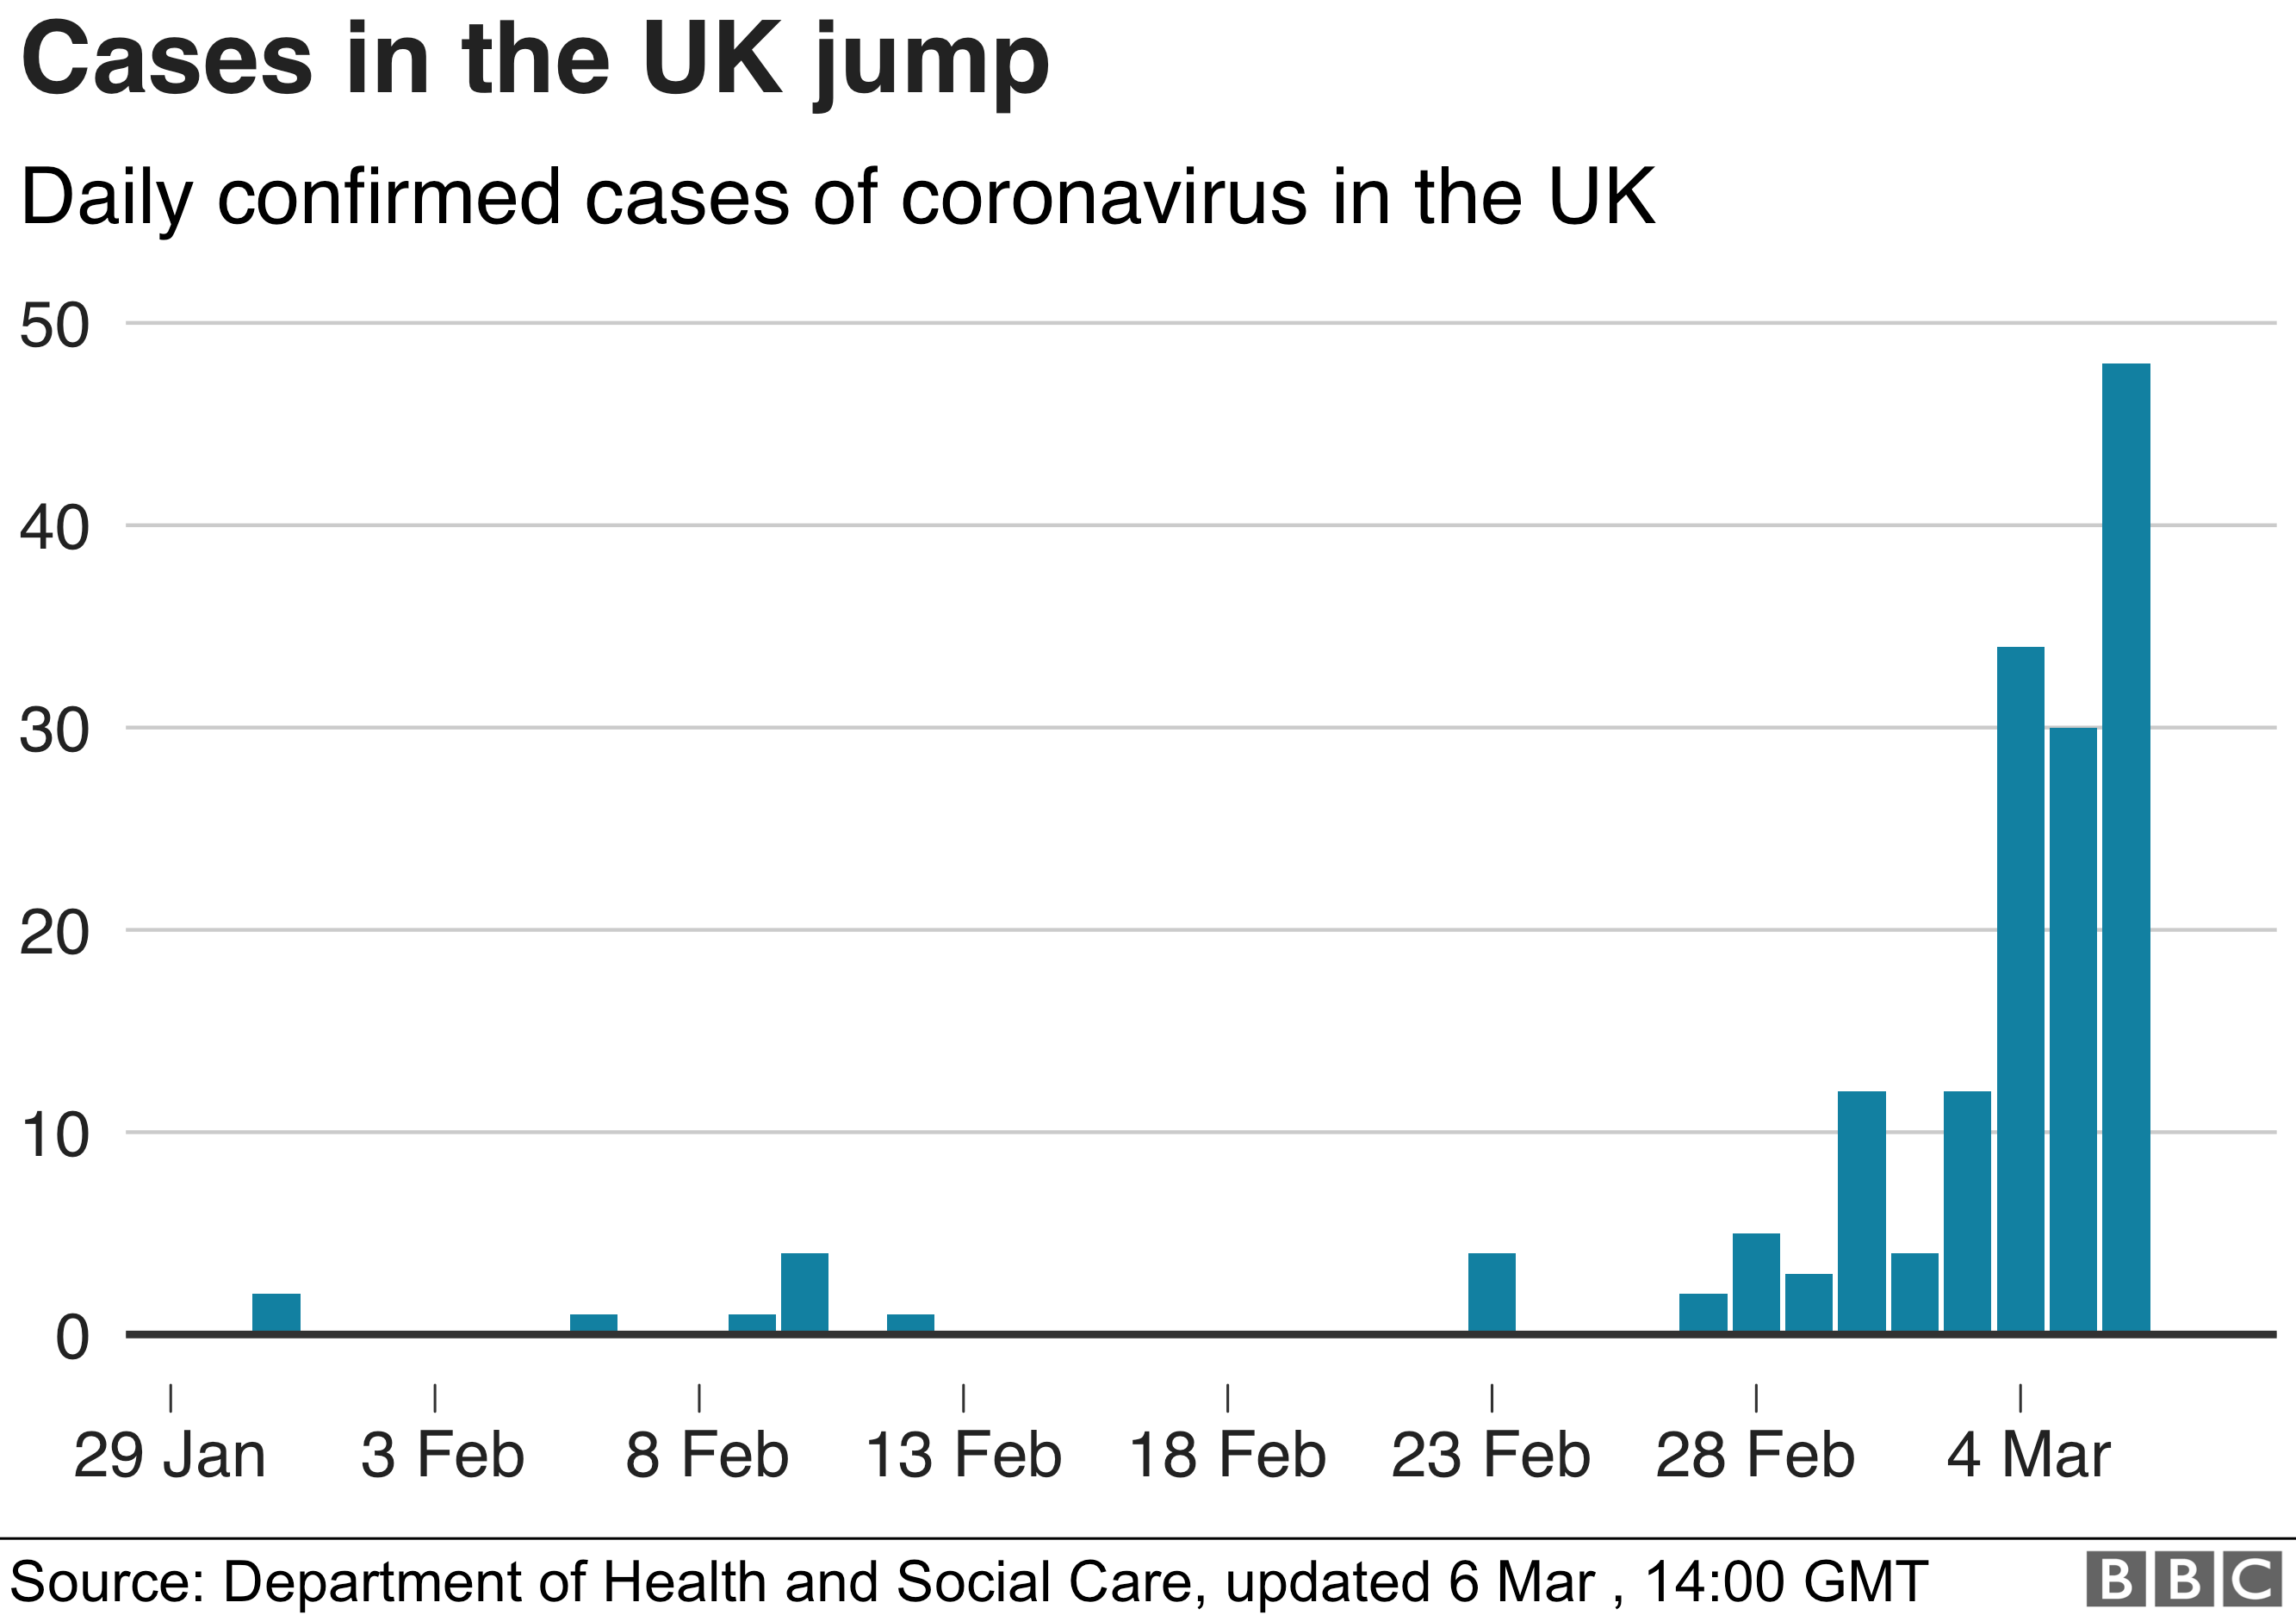 Chart showing daily confirmed coronavirus cases in the UK